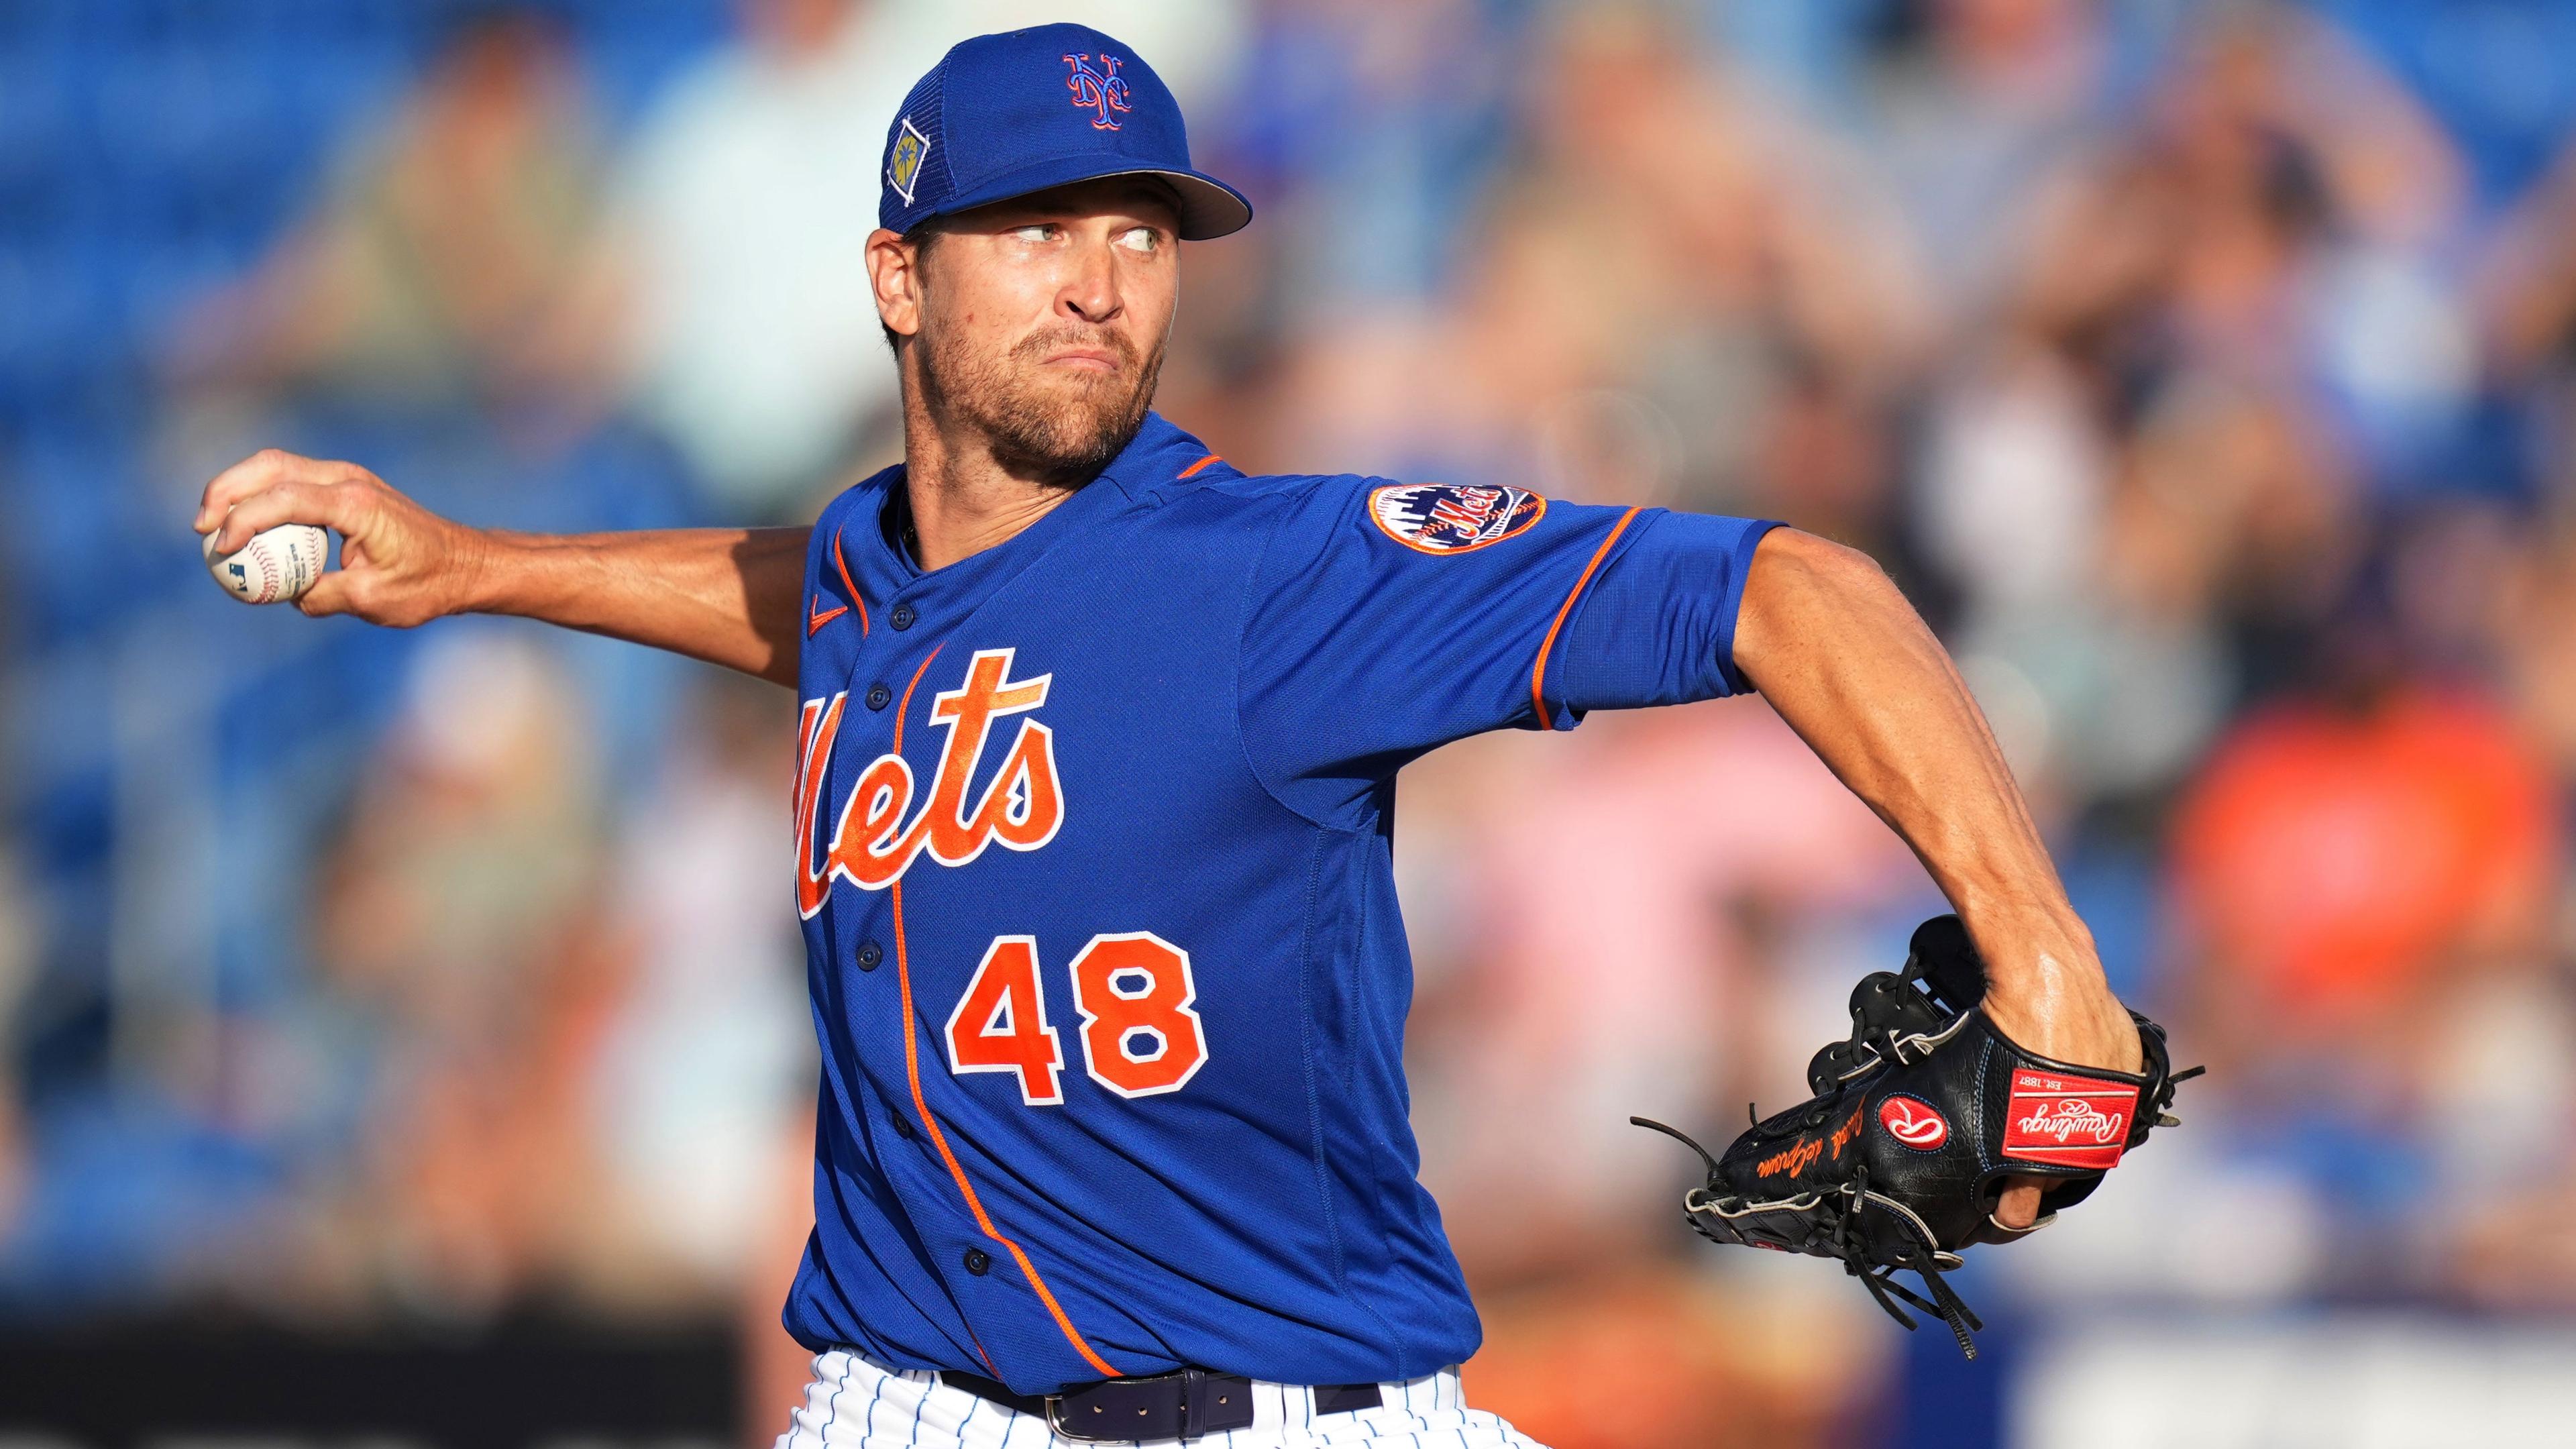 Mar 22, 2022; Port St. Lucie, Florida, USA; New York Mets starting pitcher Jacob deGrom (48) delivers a pitch in the first inning of the spring training game against the Houston Astros at Clover Park. / Jasen Vinlove-USA TODAY Sports